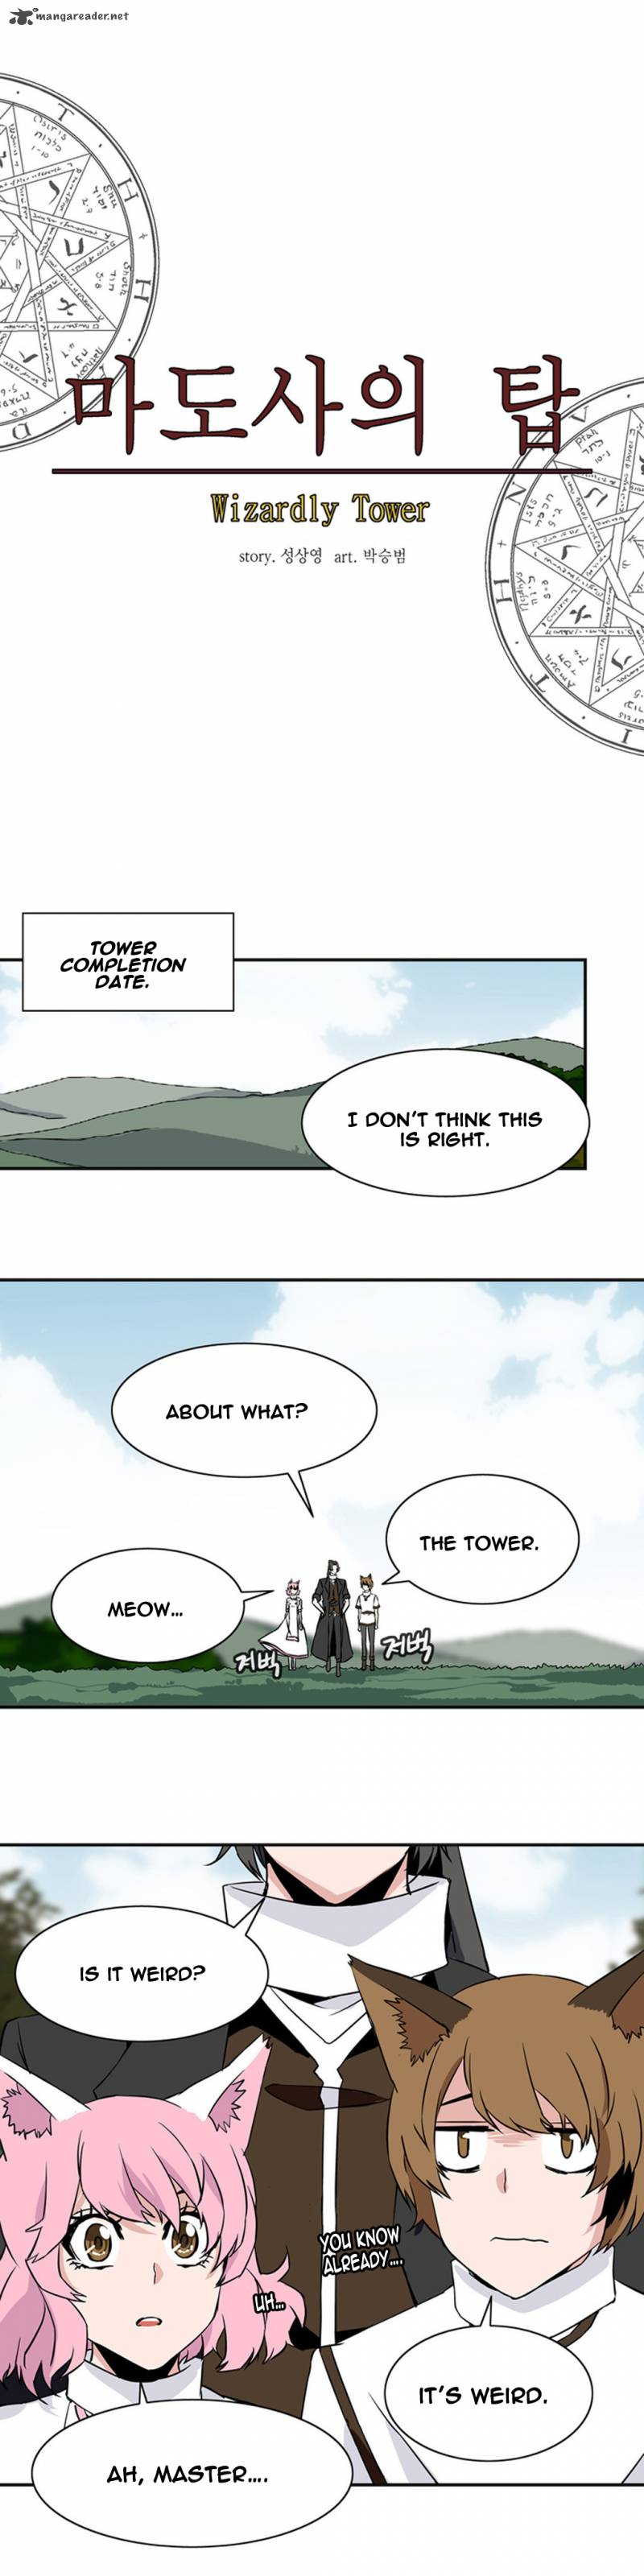 Wizardly Tower 27 4